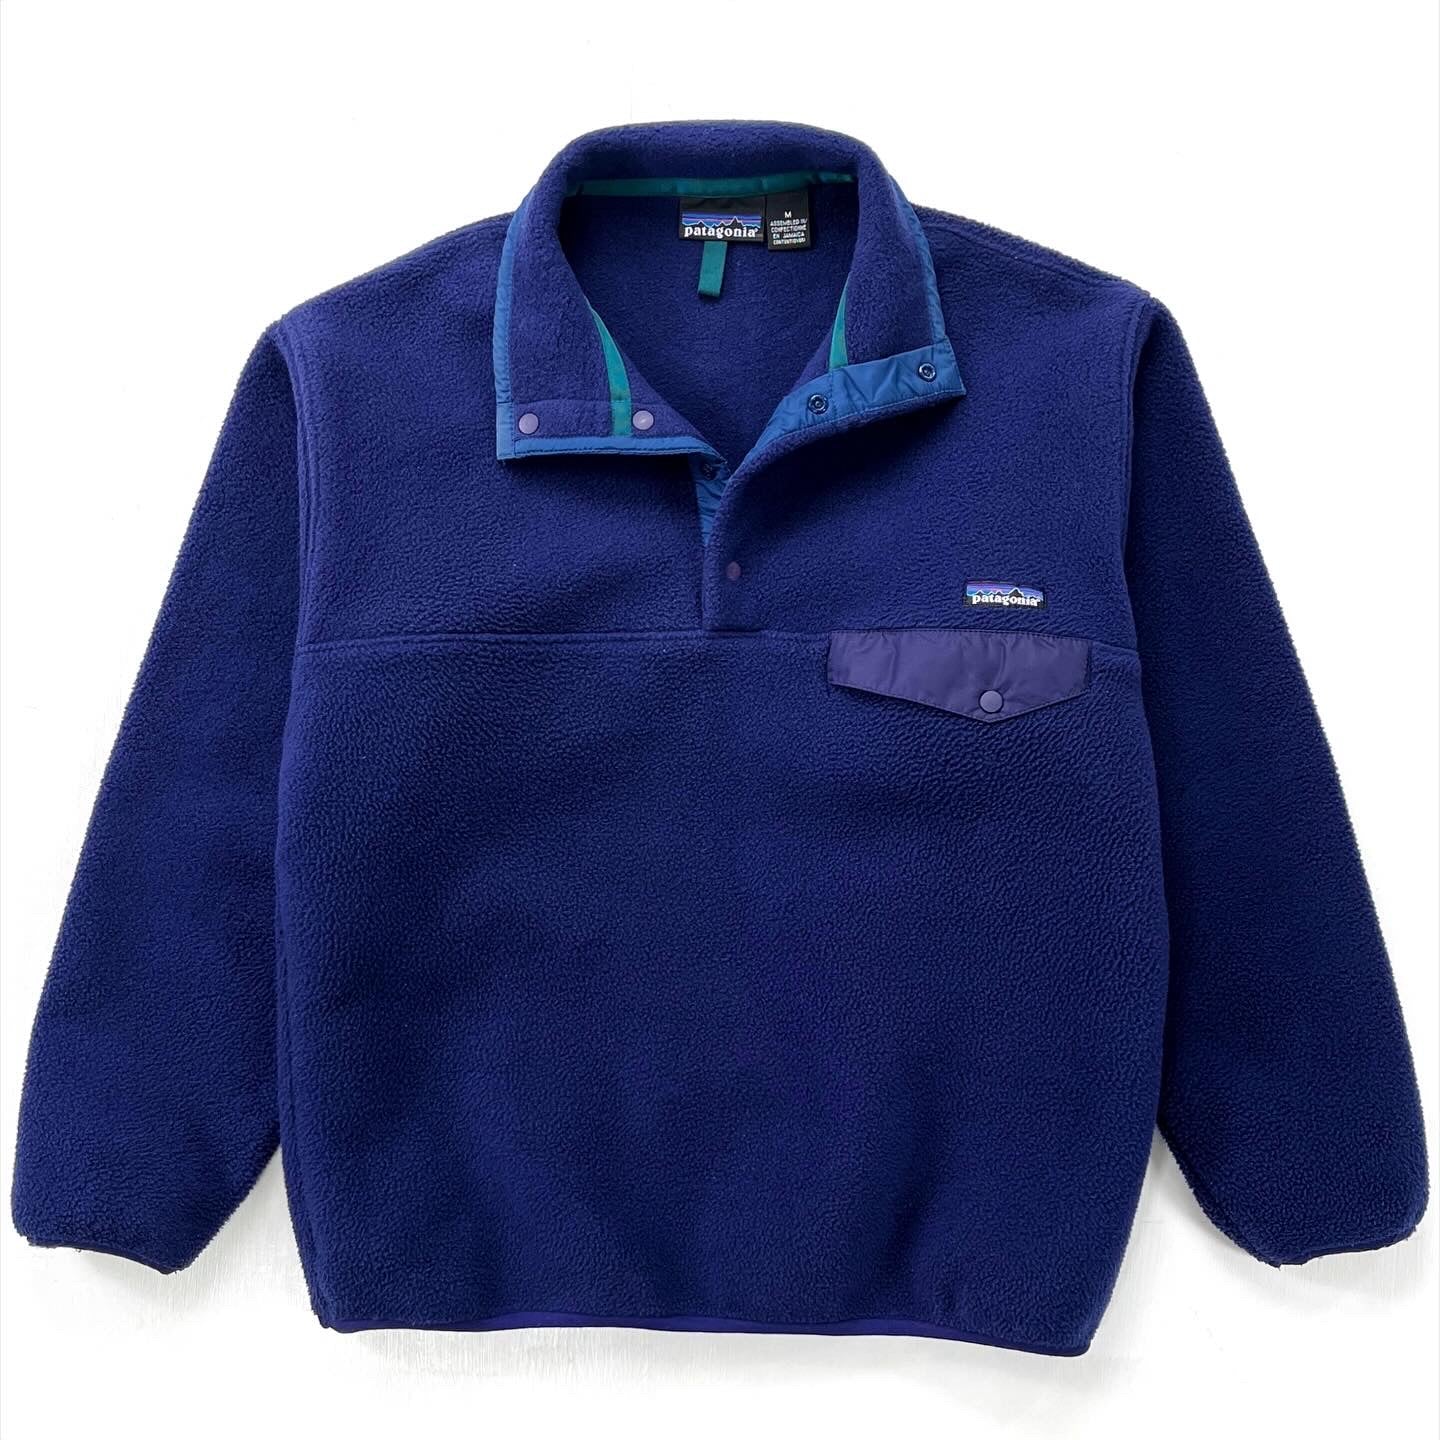 1995 Patagonia Synchilla Snap-T, Bright Navy & Storm Blue (M)